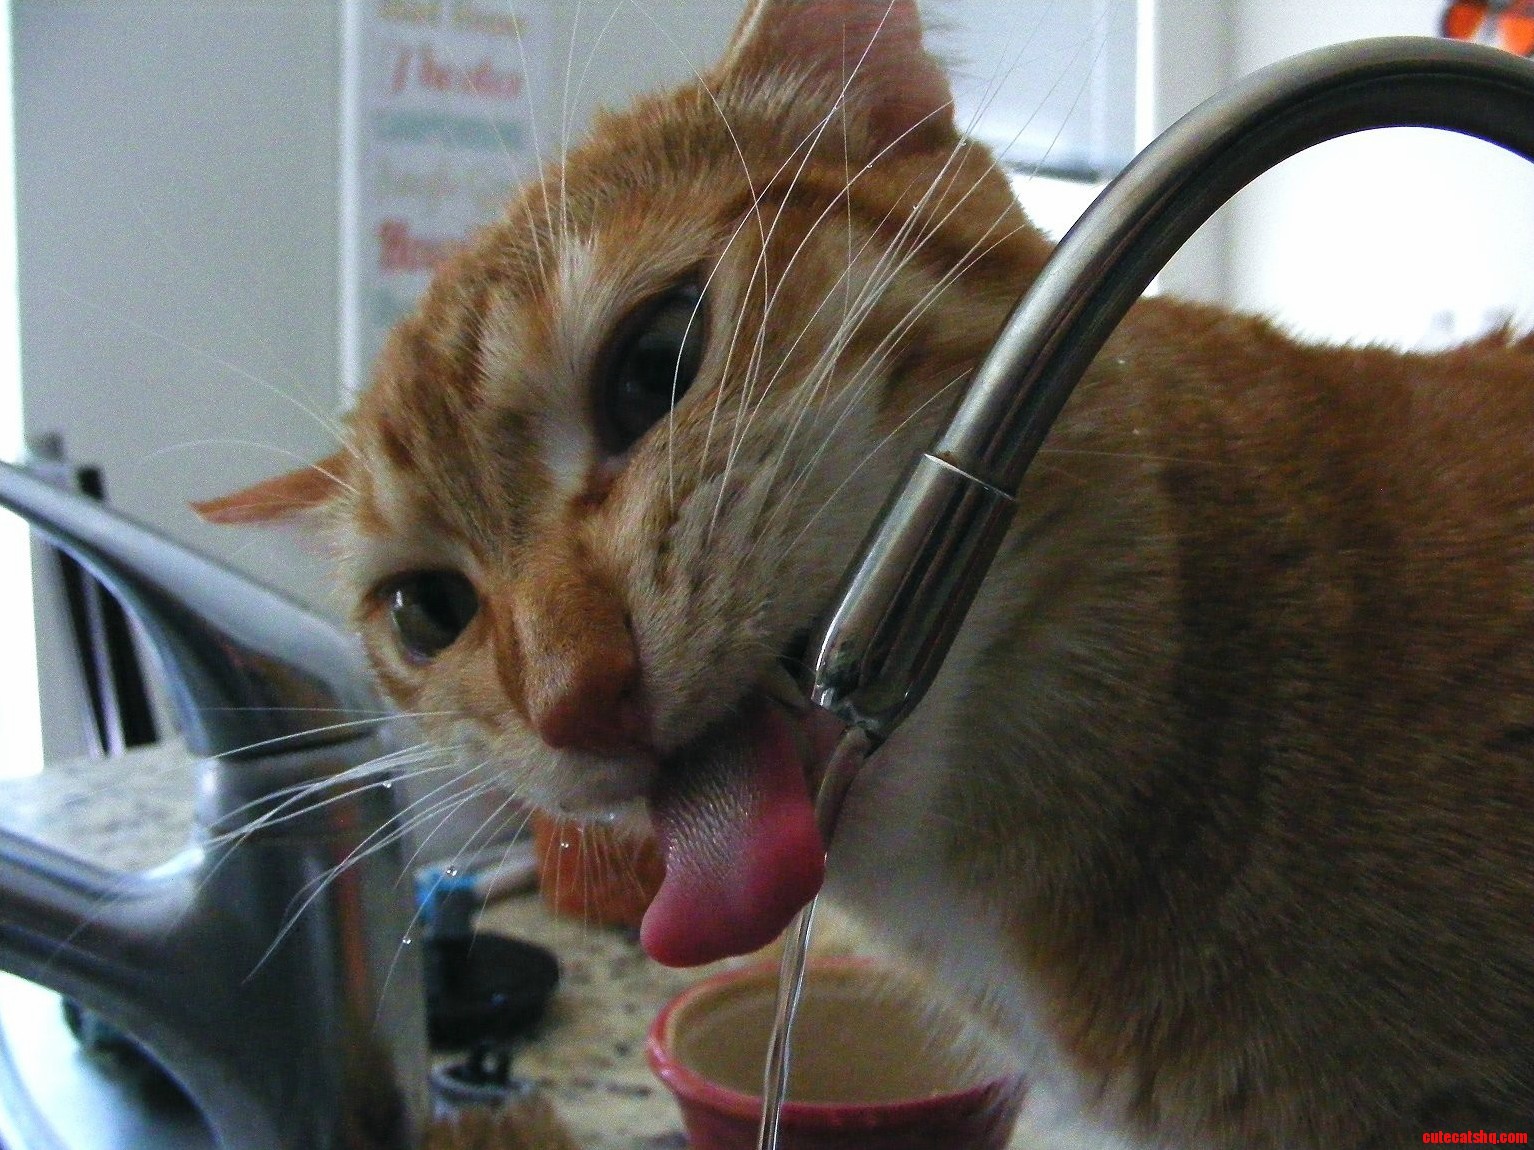 Drinking from the tap means drippy whiskers.